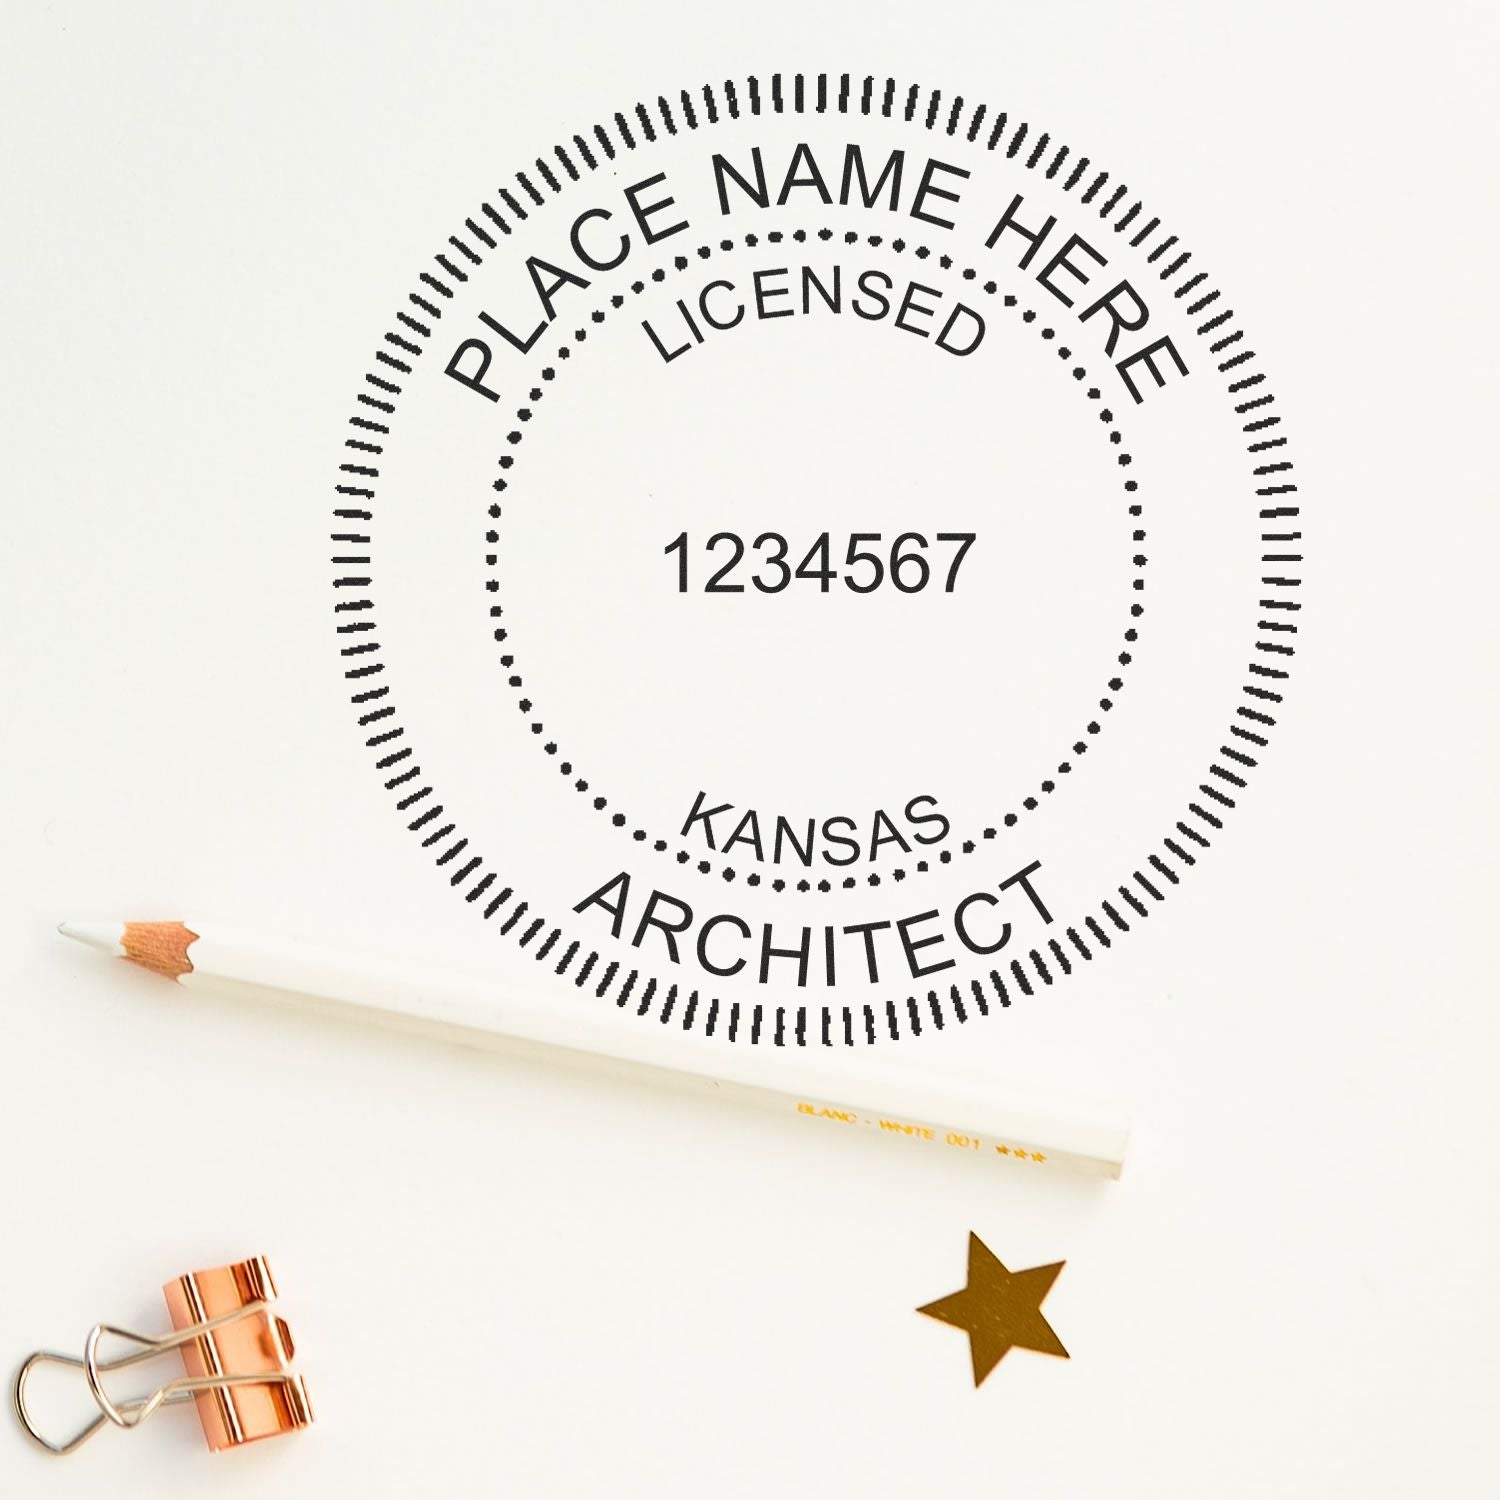 Unleash Your Architectural Authority with a Kansas Architect Seal Feature Image